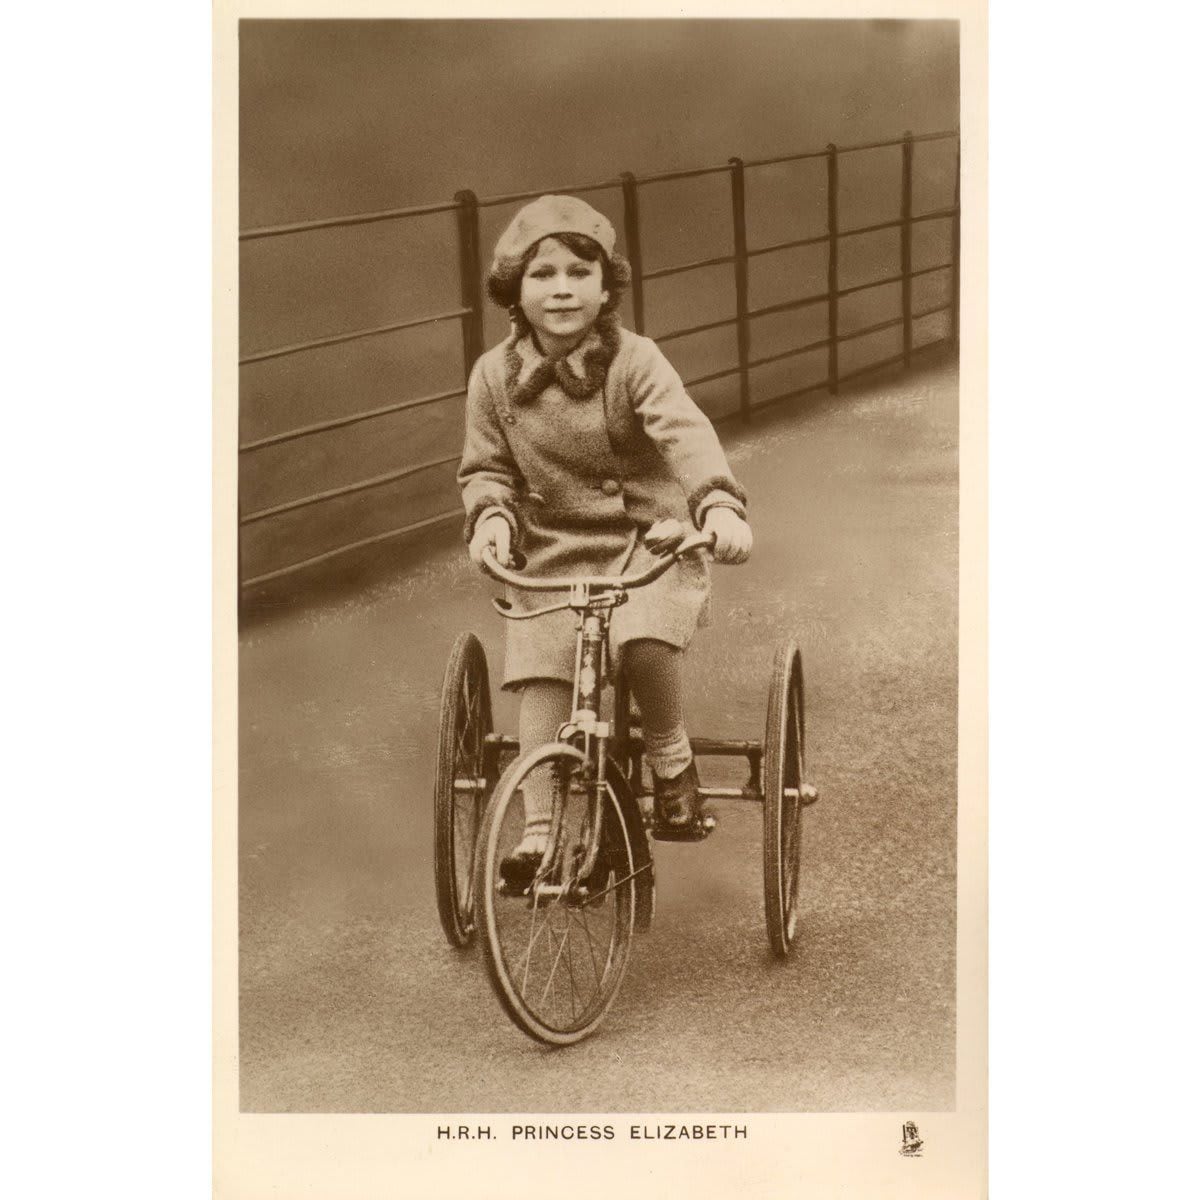 Keep calm and cycle on! Future Queen Elizabeth was pictured riding her tricycle in a park.